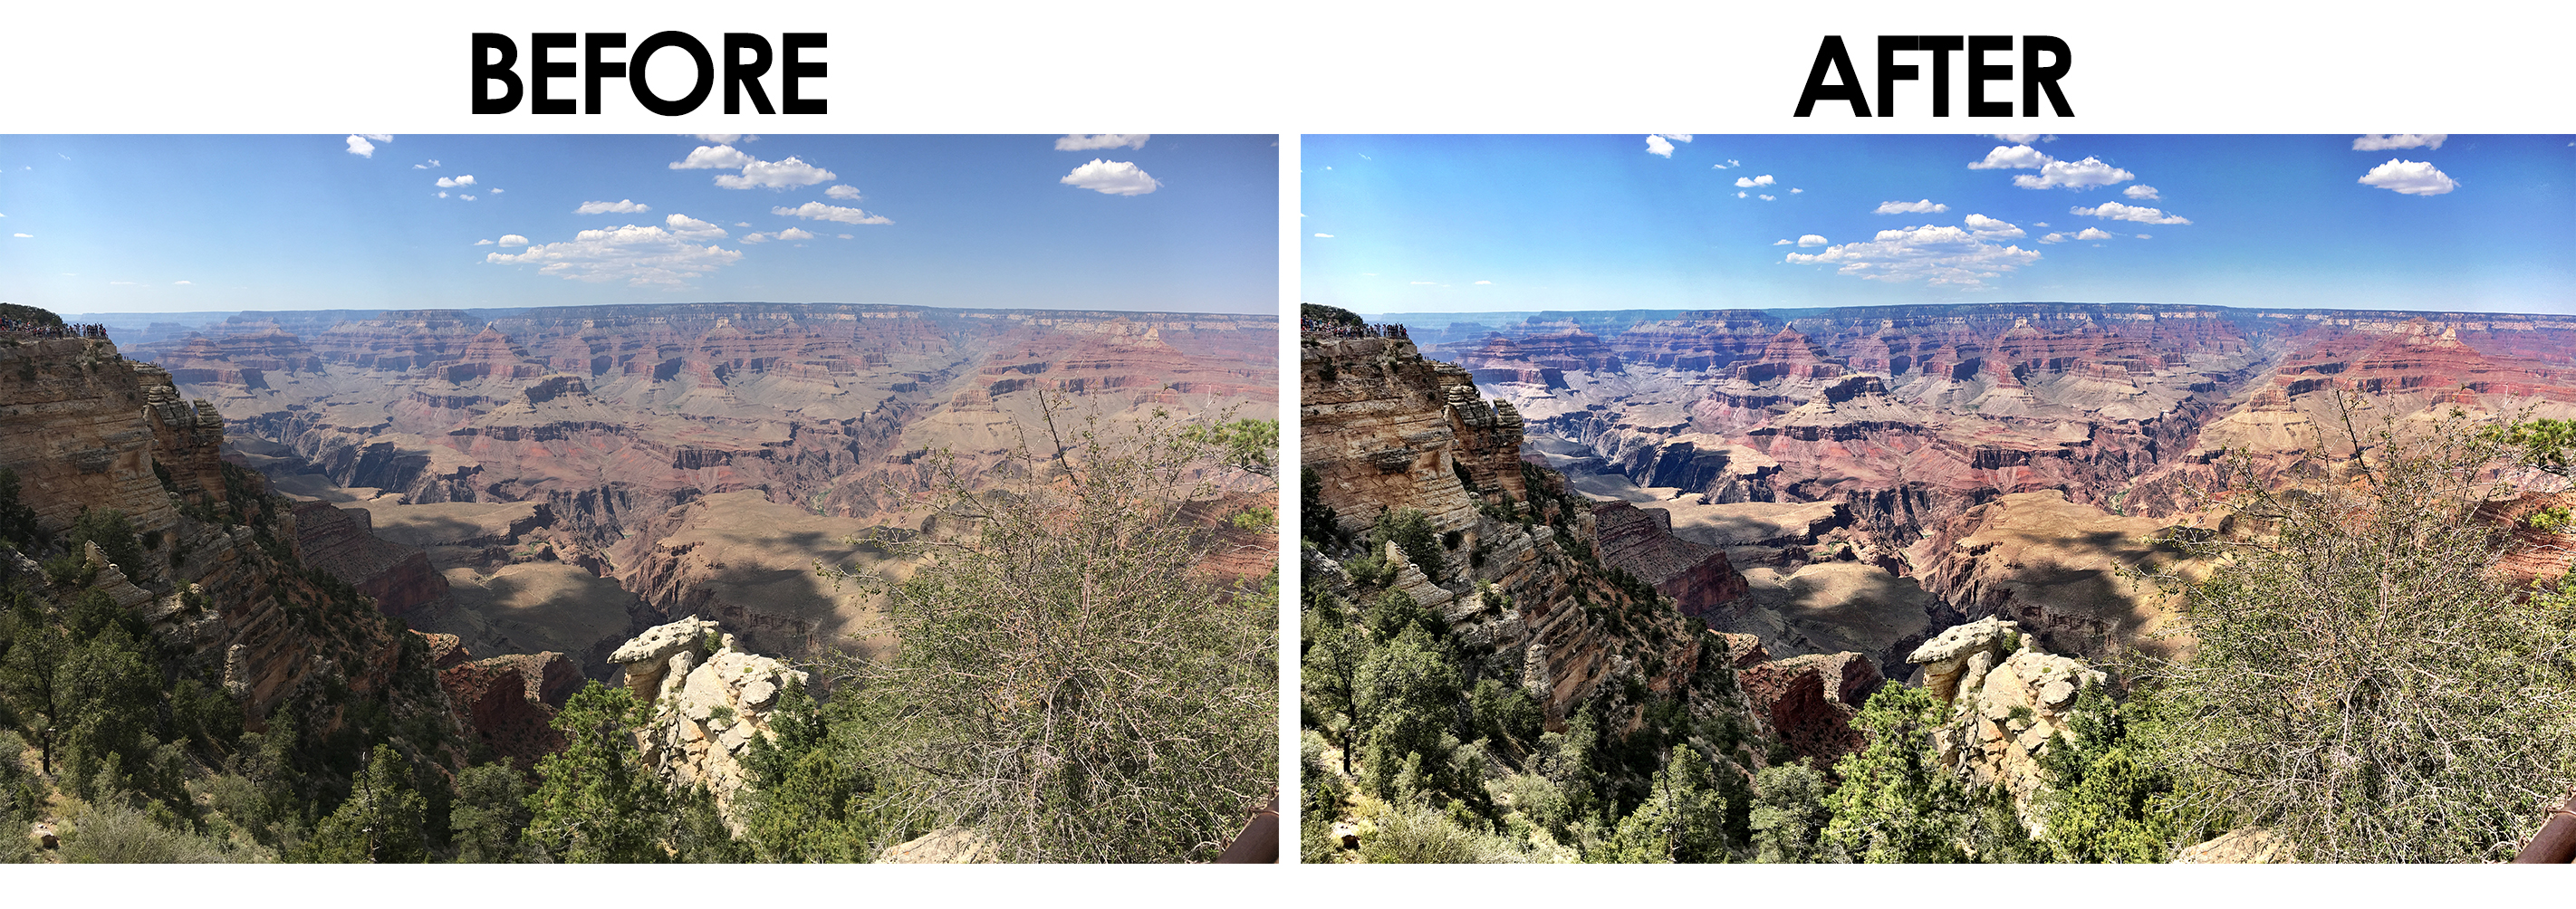 Grand Canyon Before and After - Camera+ Photo App